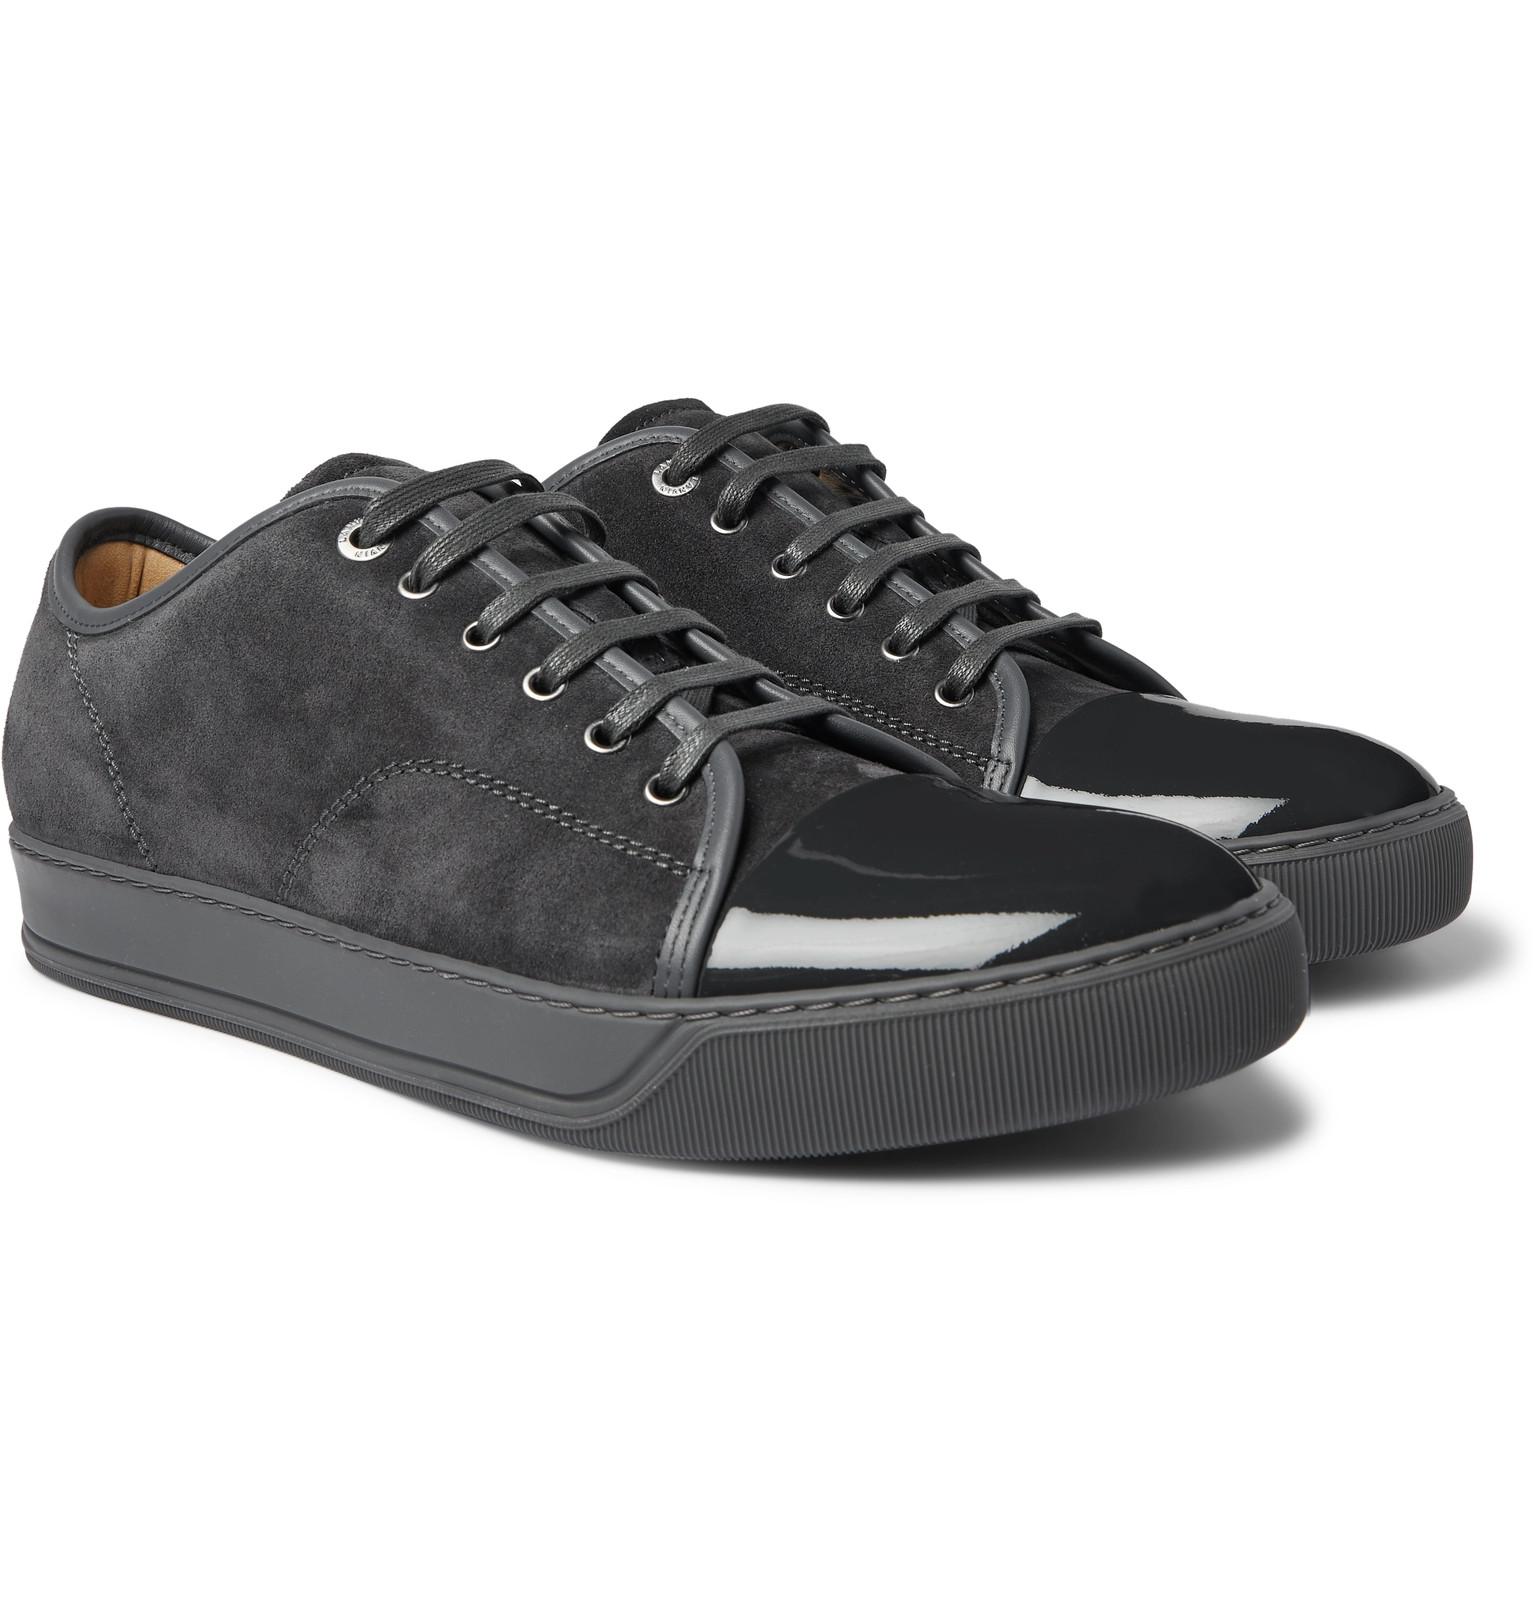 Lanvin Cap-toe Suede And Patent-leather Sneakers in Gray for Men - Lyst